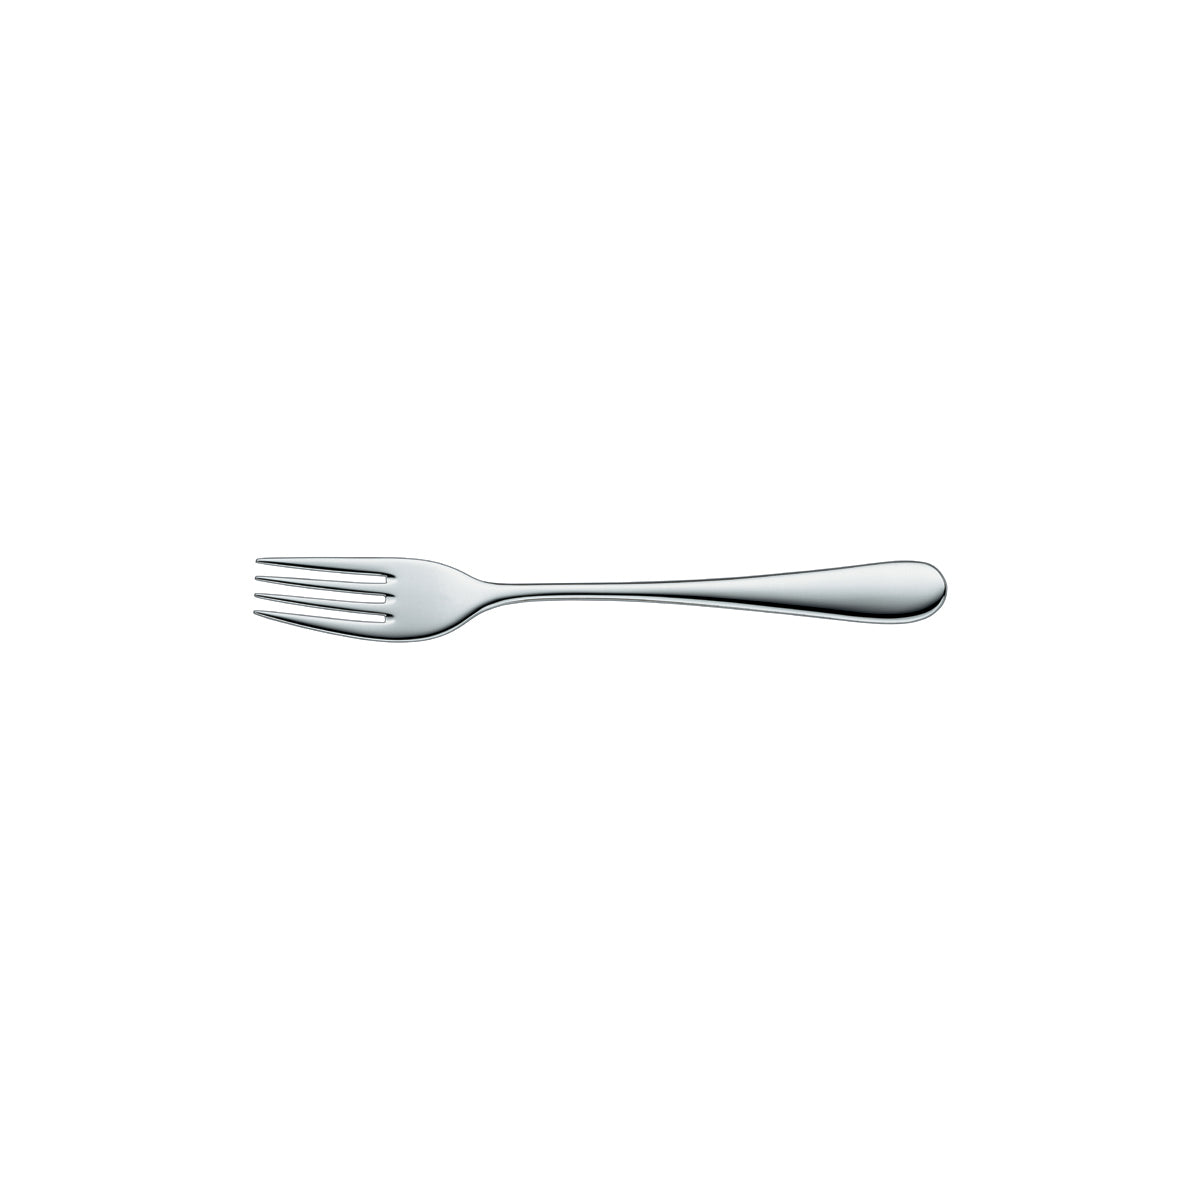 12.1902.6040 WMF Signum Table Fork Stainless Steel Tomkin Australia Hospitality Supplies